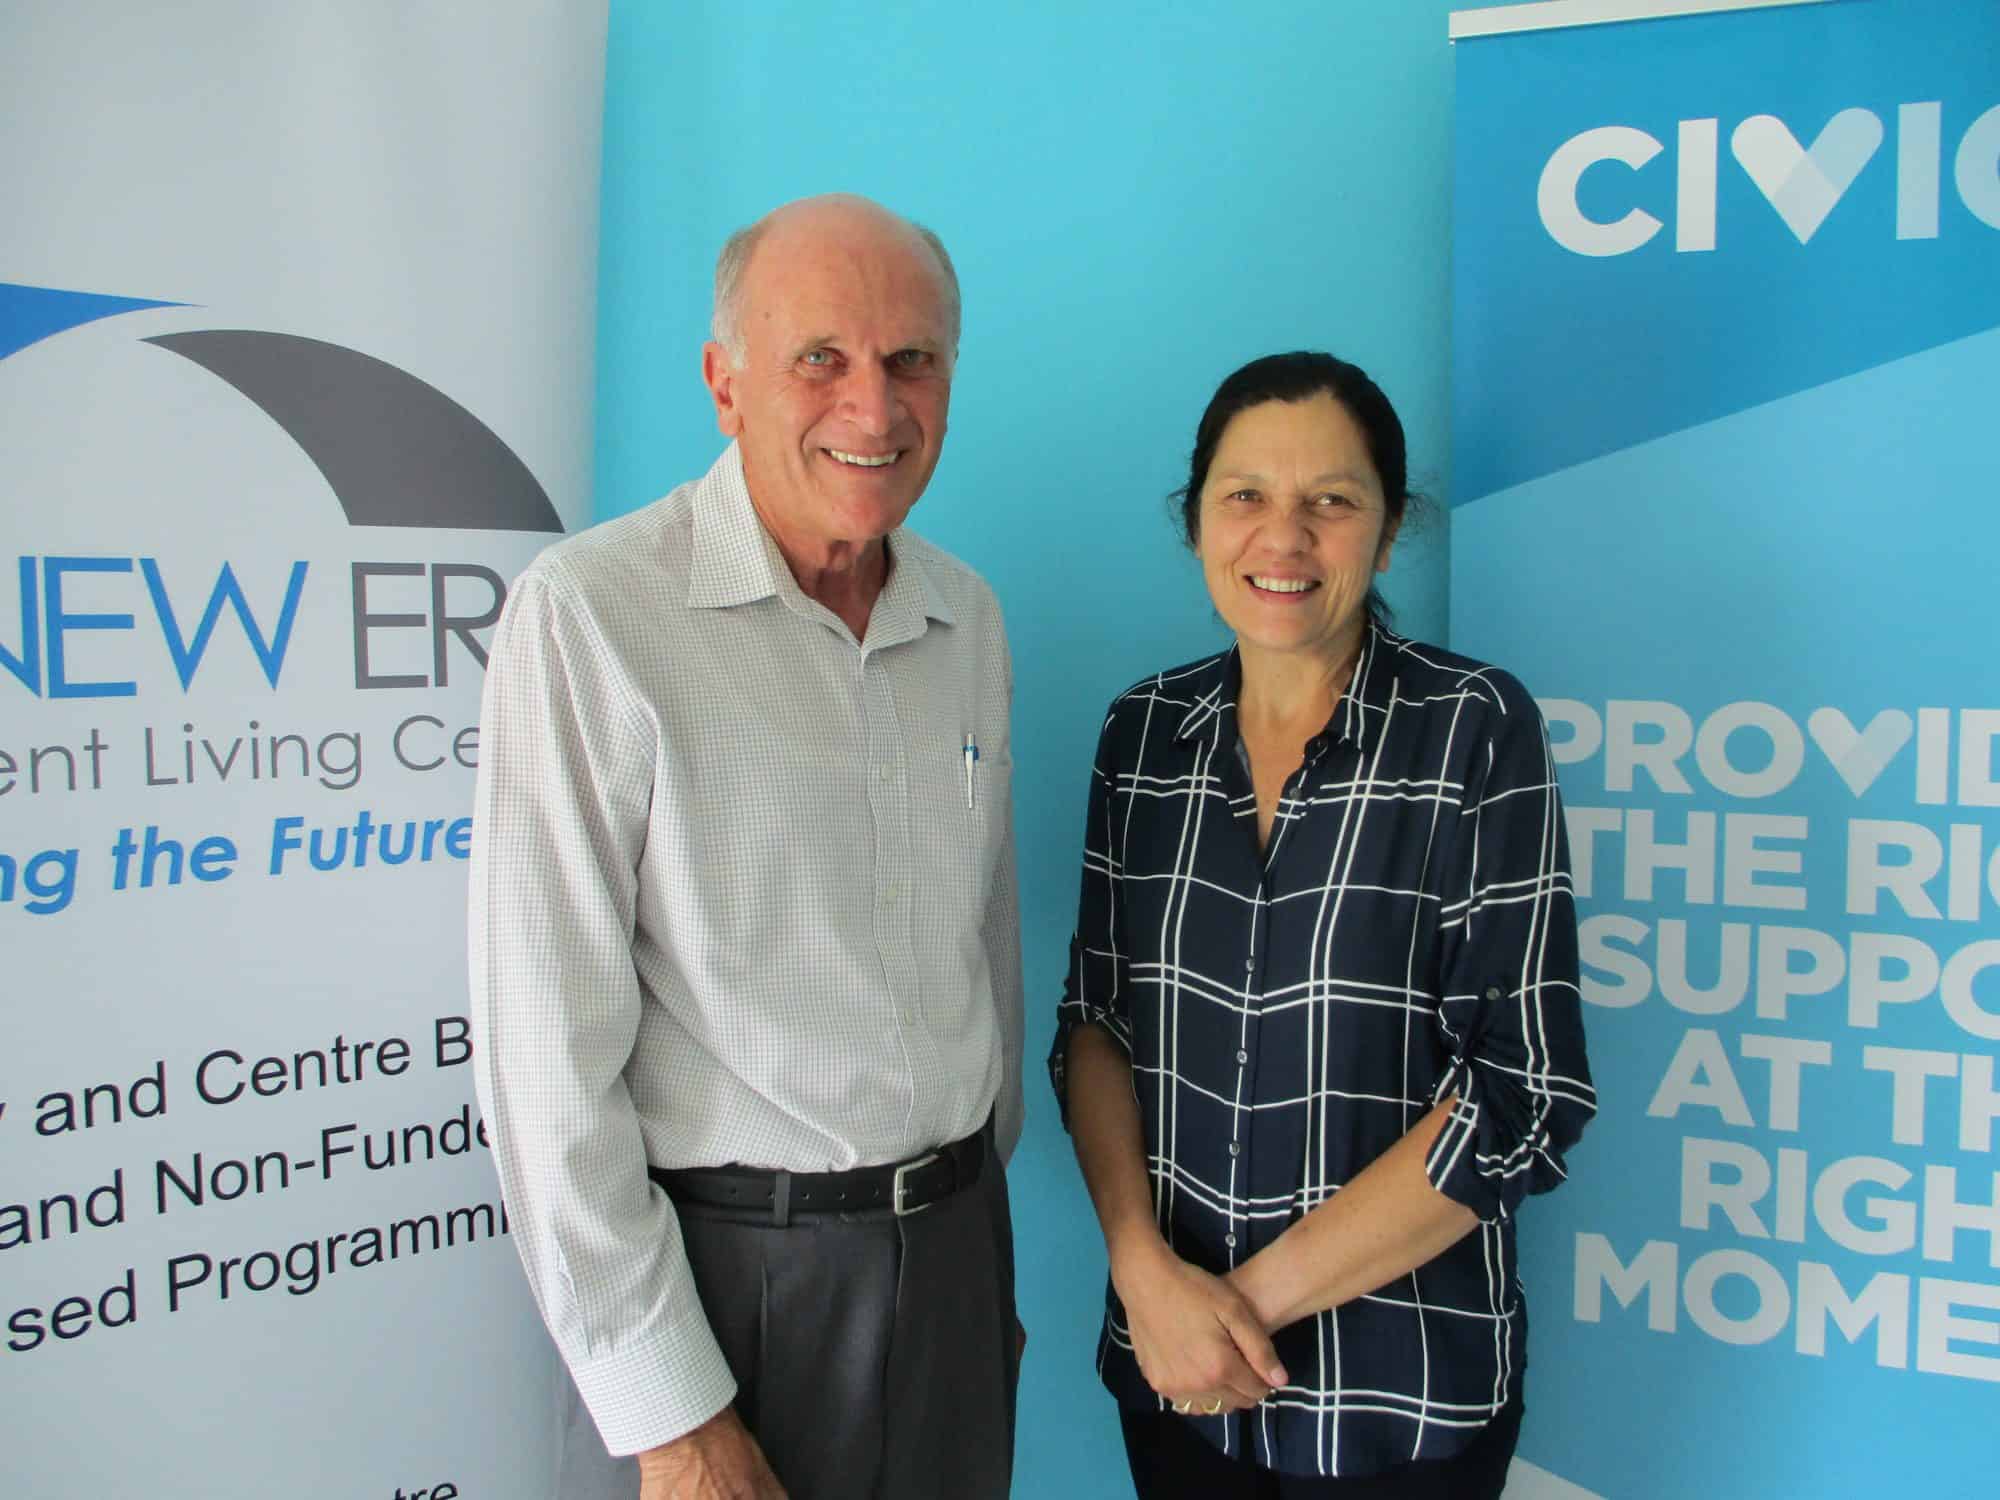 Greg Gibbens, President of the Committee of Management of New Era with  Civic CEO Annie Doyle